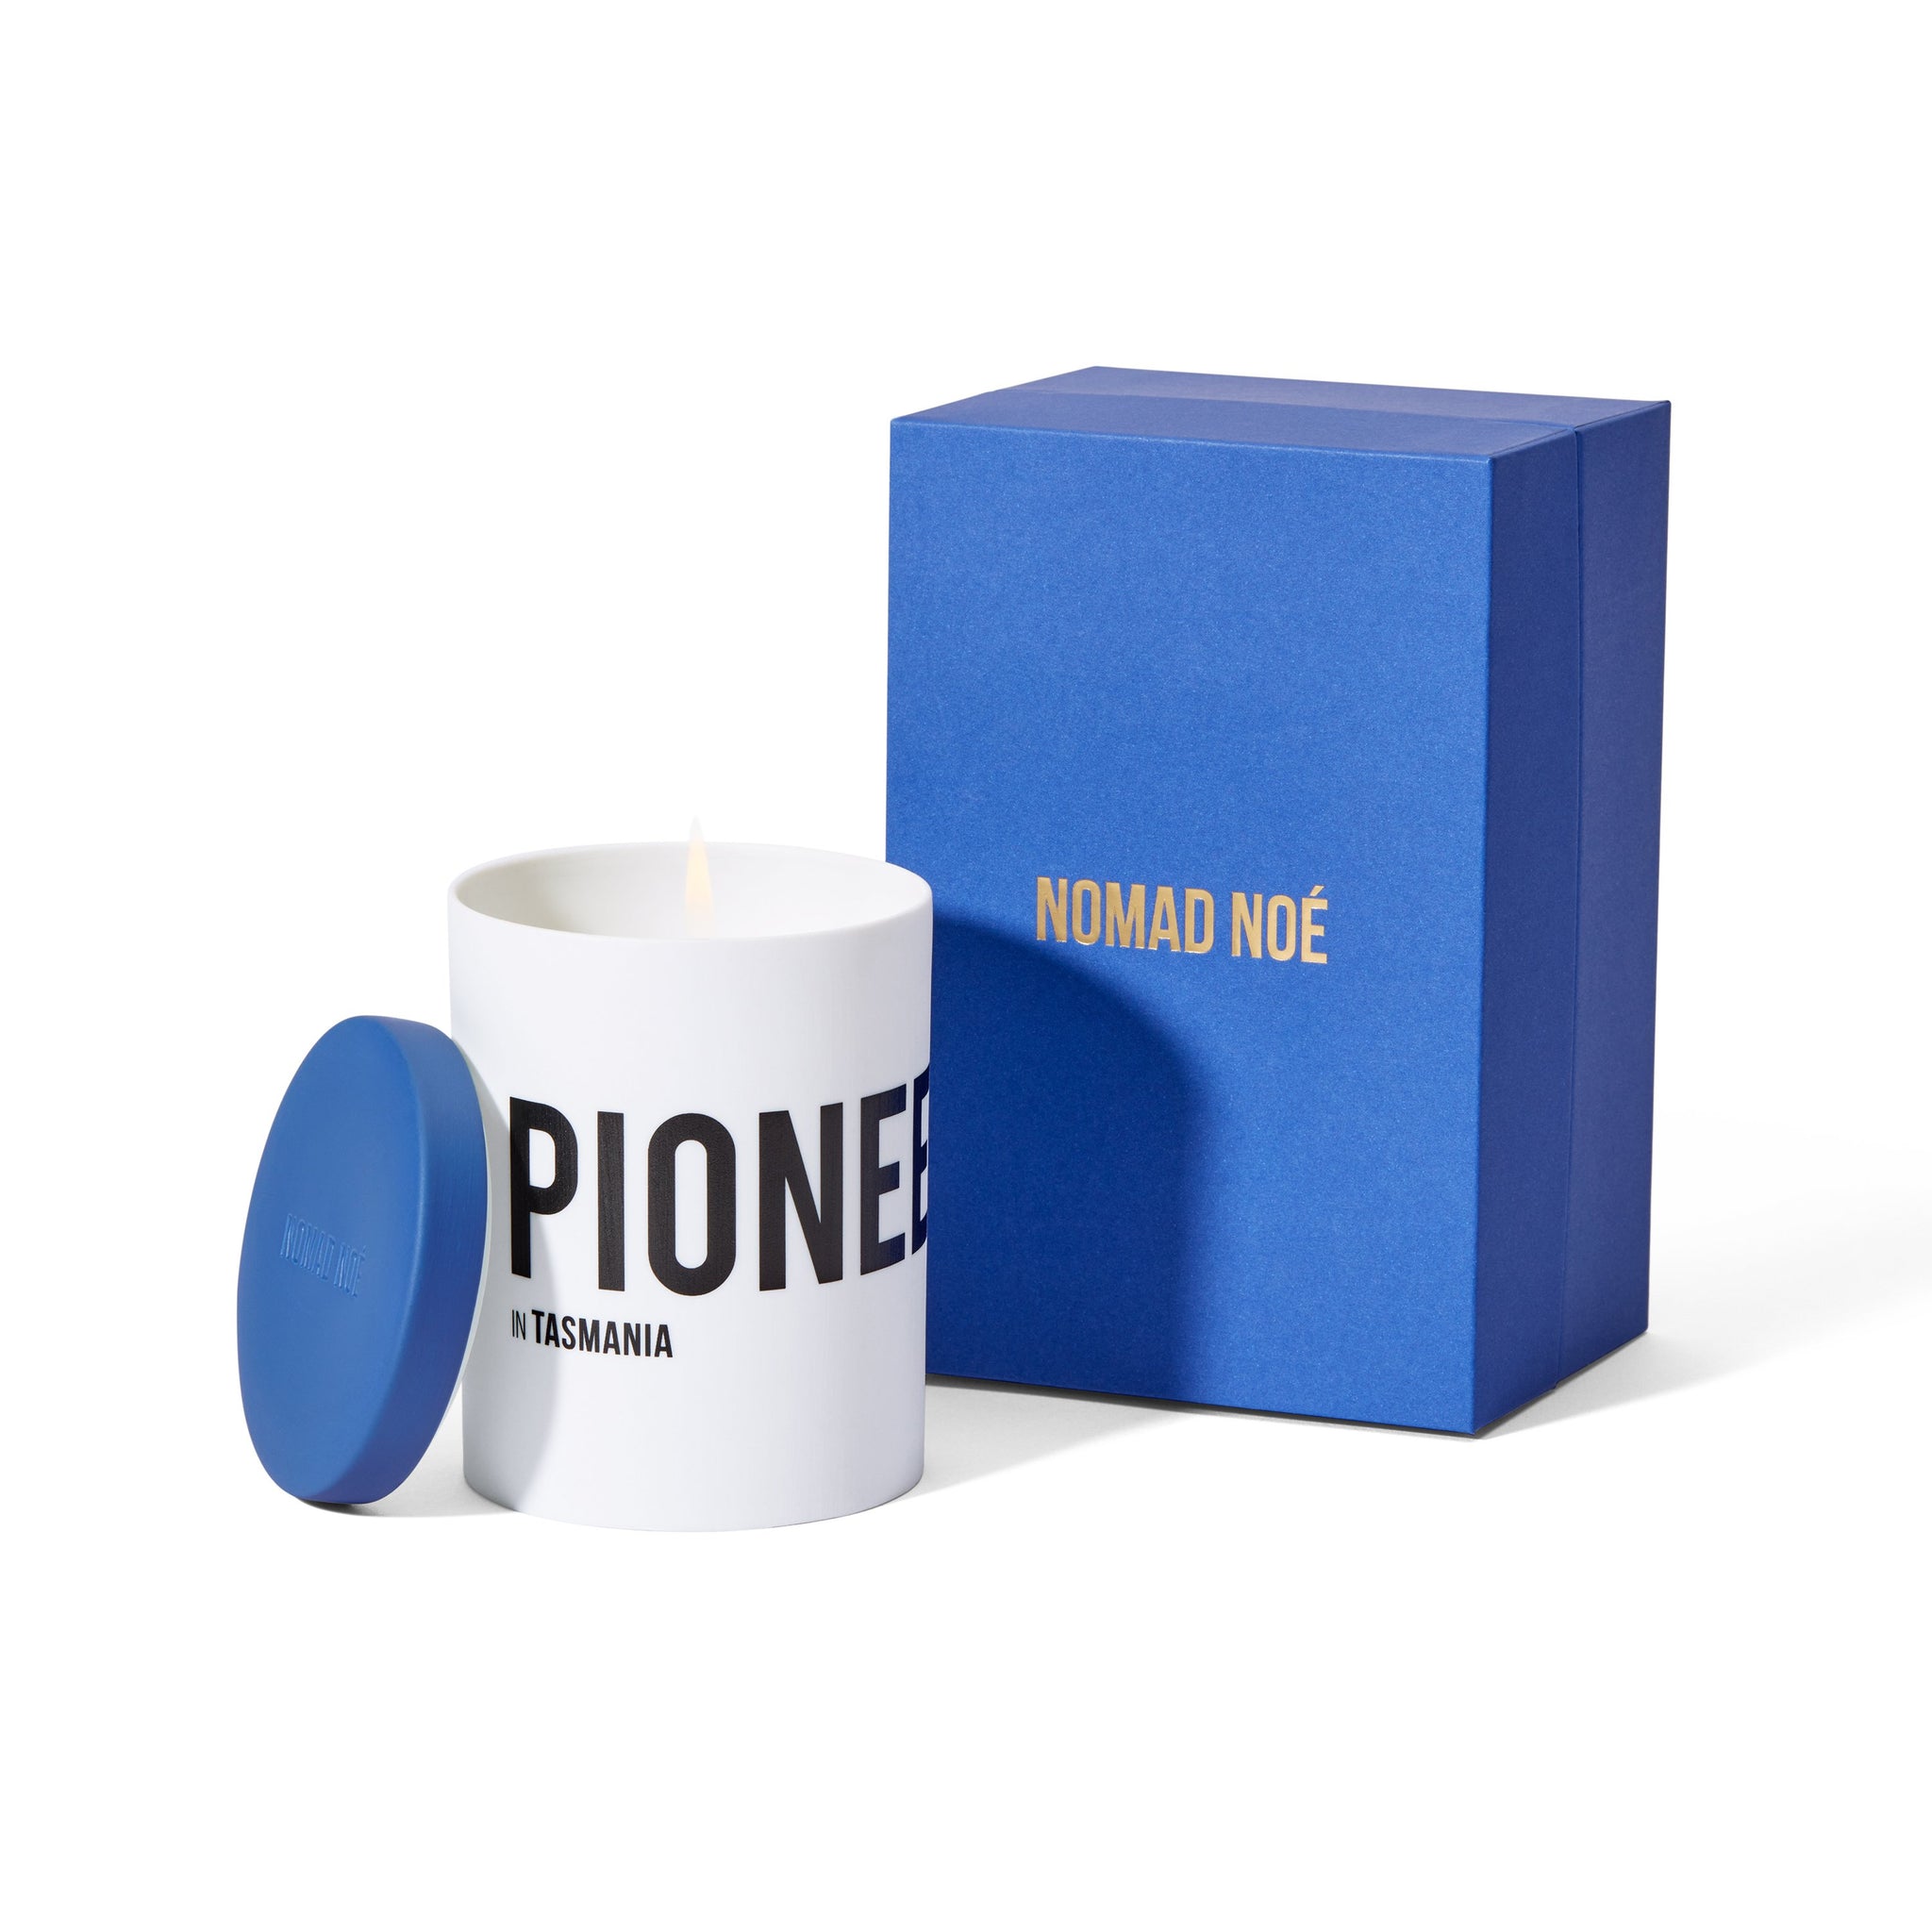 Nomad Noé: Pioneer in Tasmania Candle out of box